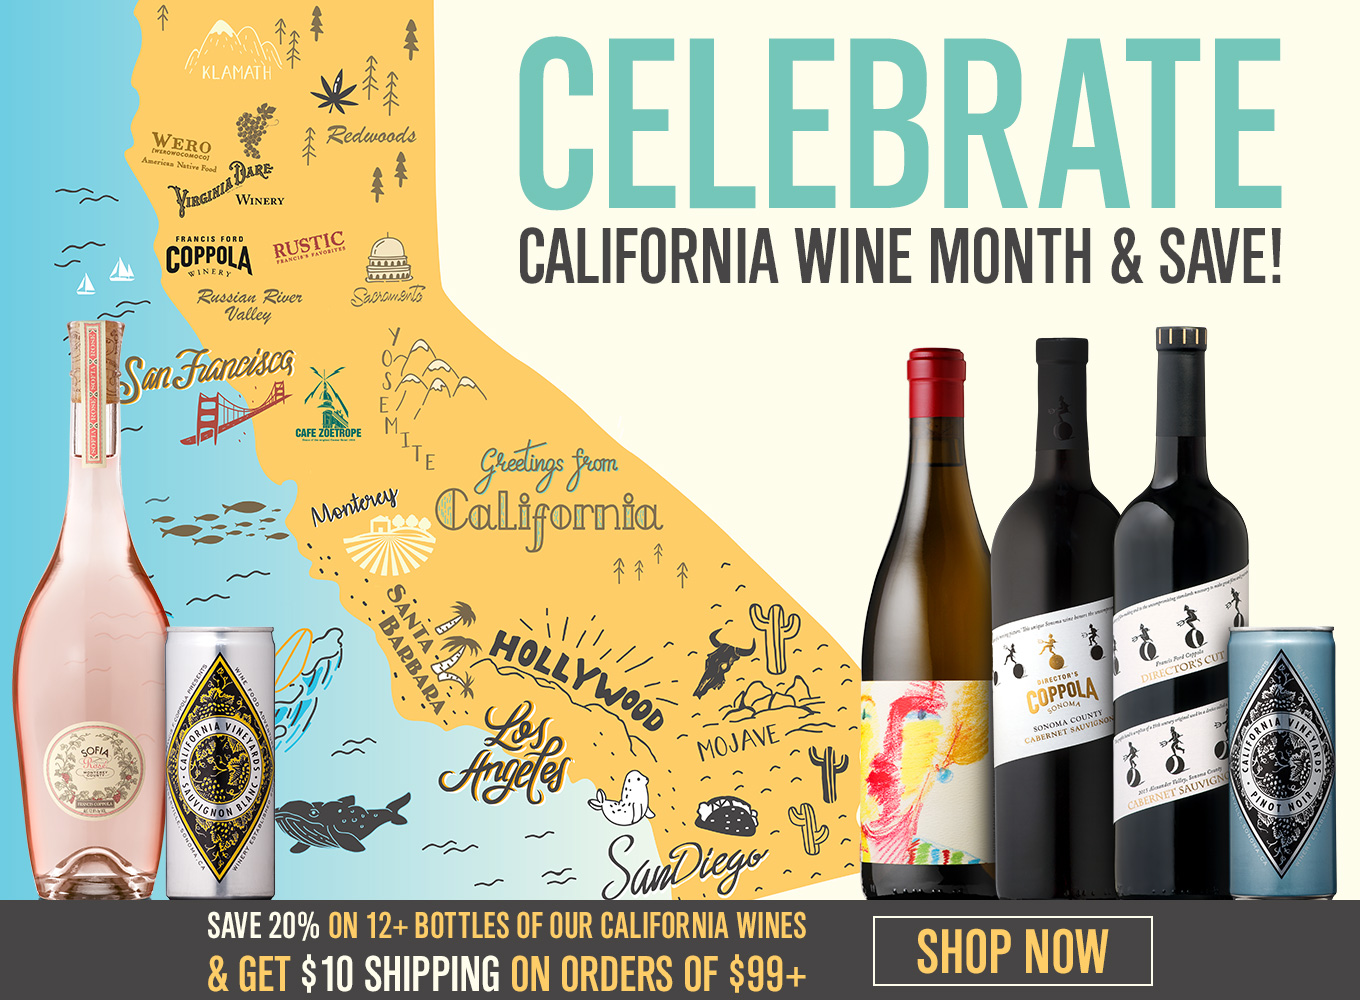 Celebrate California Wine Month & SAVE! Save 20% on 12+ bottles of our California wines & get $10 Shipping on orders of $99+, SHOP NOW